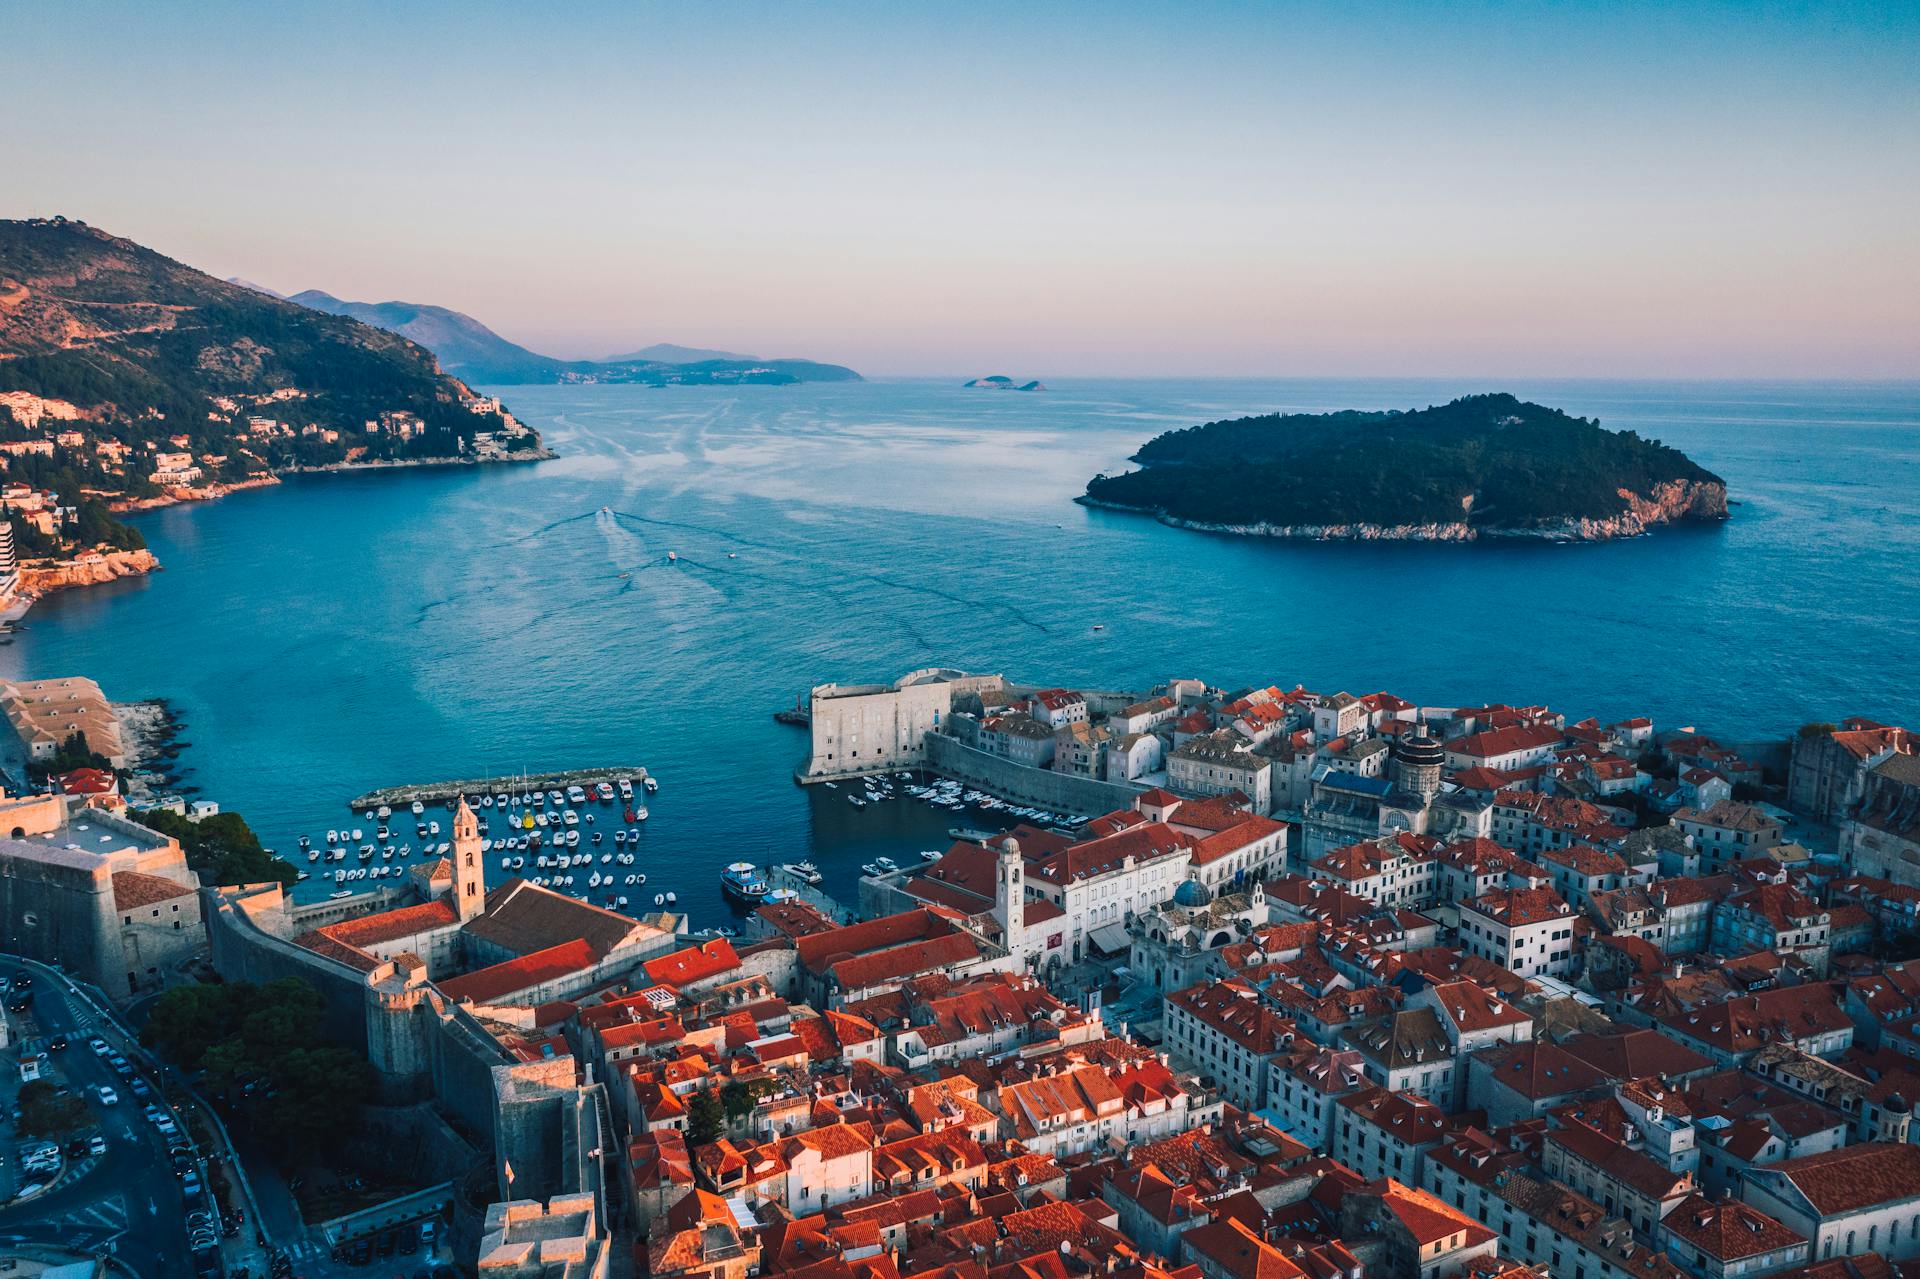 <p>Dubrovnik’s medieval old town and stunning Adriatic coastline make it a charming destination for solo travelers. Stroll along the city walls for breathtaking views or relax on the beach after exploring historic sites. The city’s warm and welcoming atmosphere, along with its rich history, makes it a great place to unwind and connect with locals.</p> <p>Be mindful of crowds in the Old Town and wear comfortable shoes for walking on uneven cobblestone streets. Connect with locals over traditional Croatian cuisine, local wine tastings, or by joining guided tours of Game of Thrones filming locations.</p>